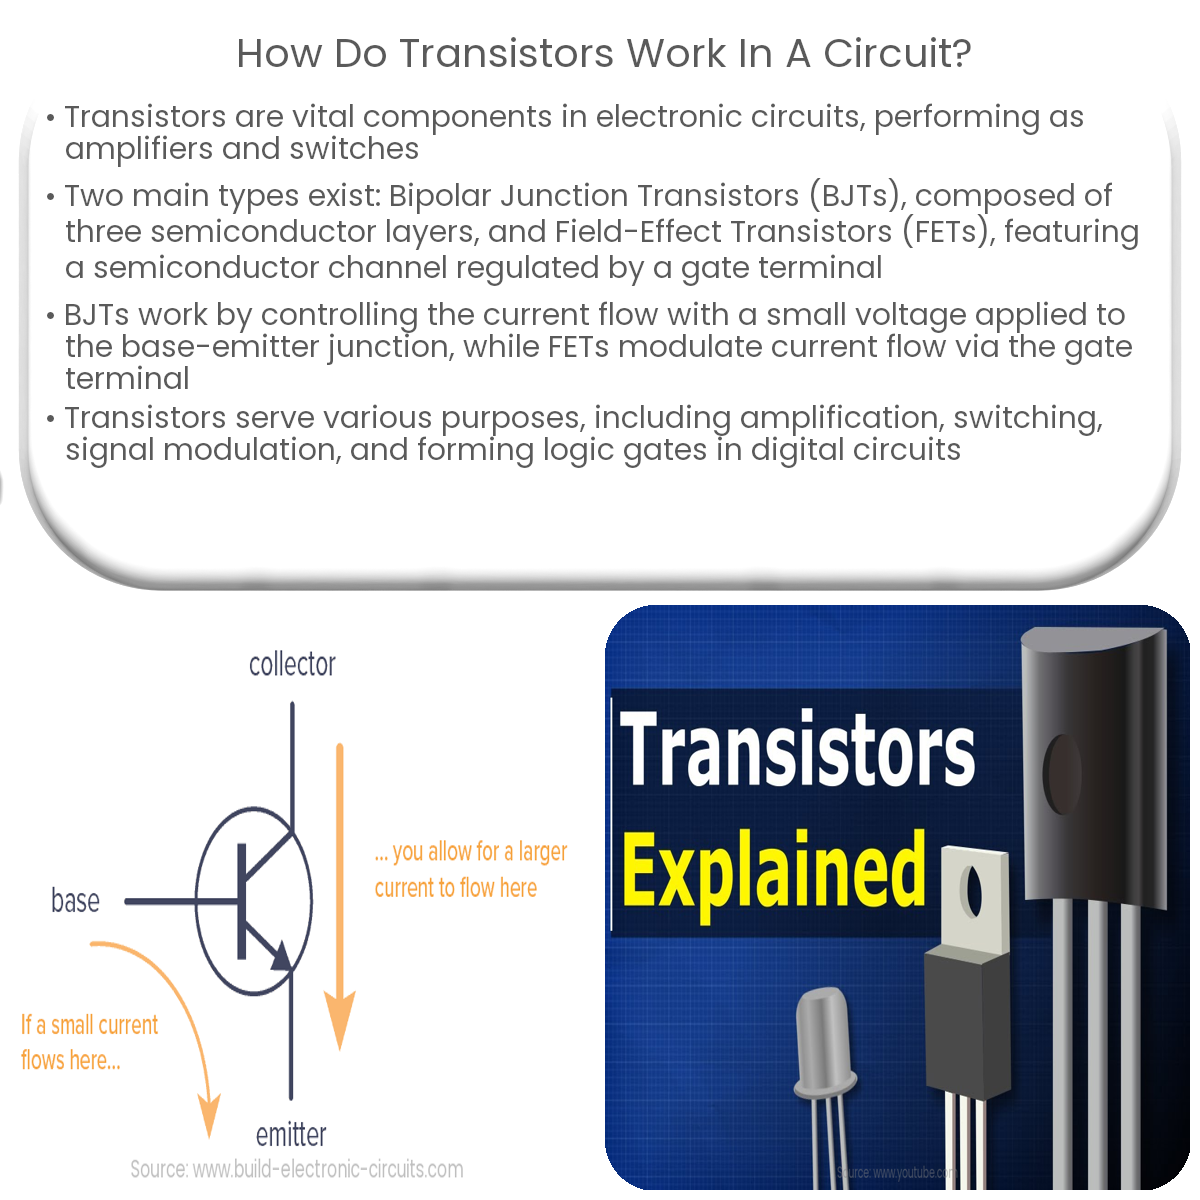 How do transistors work in a circuit?